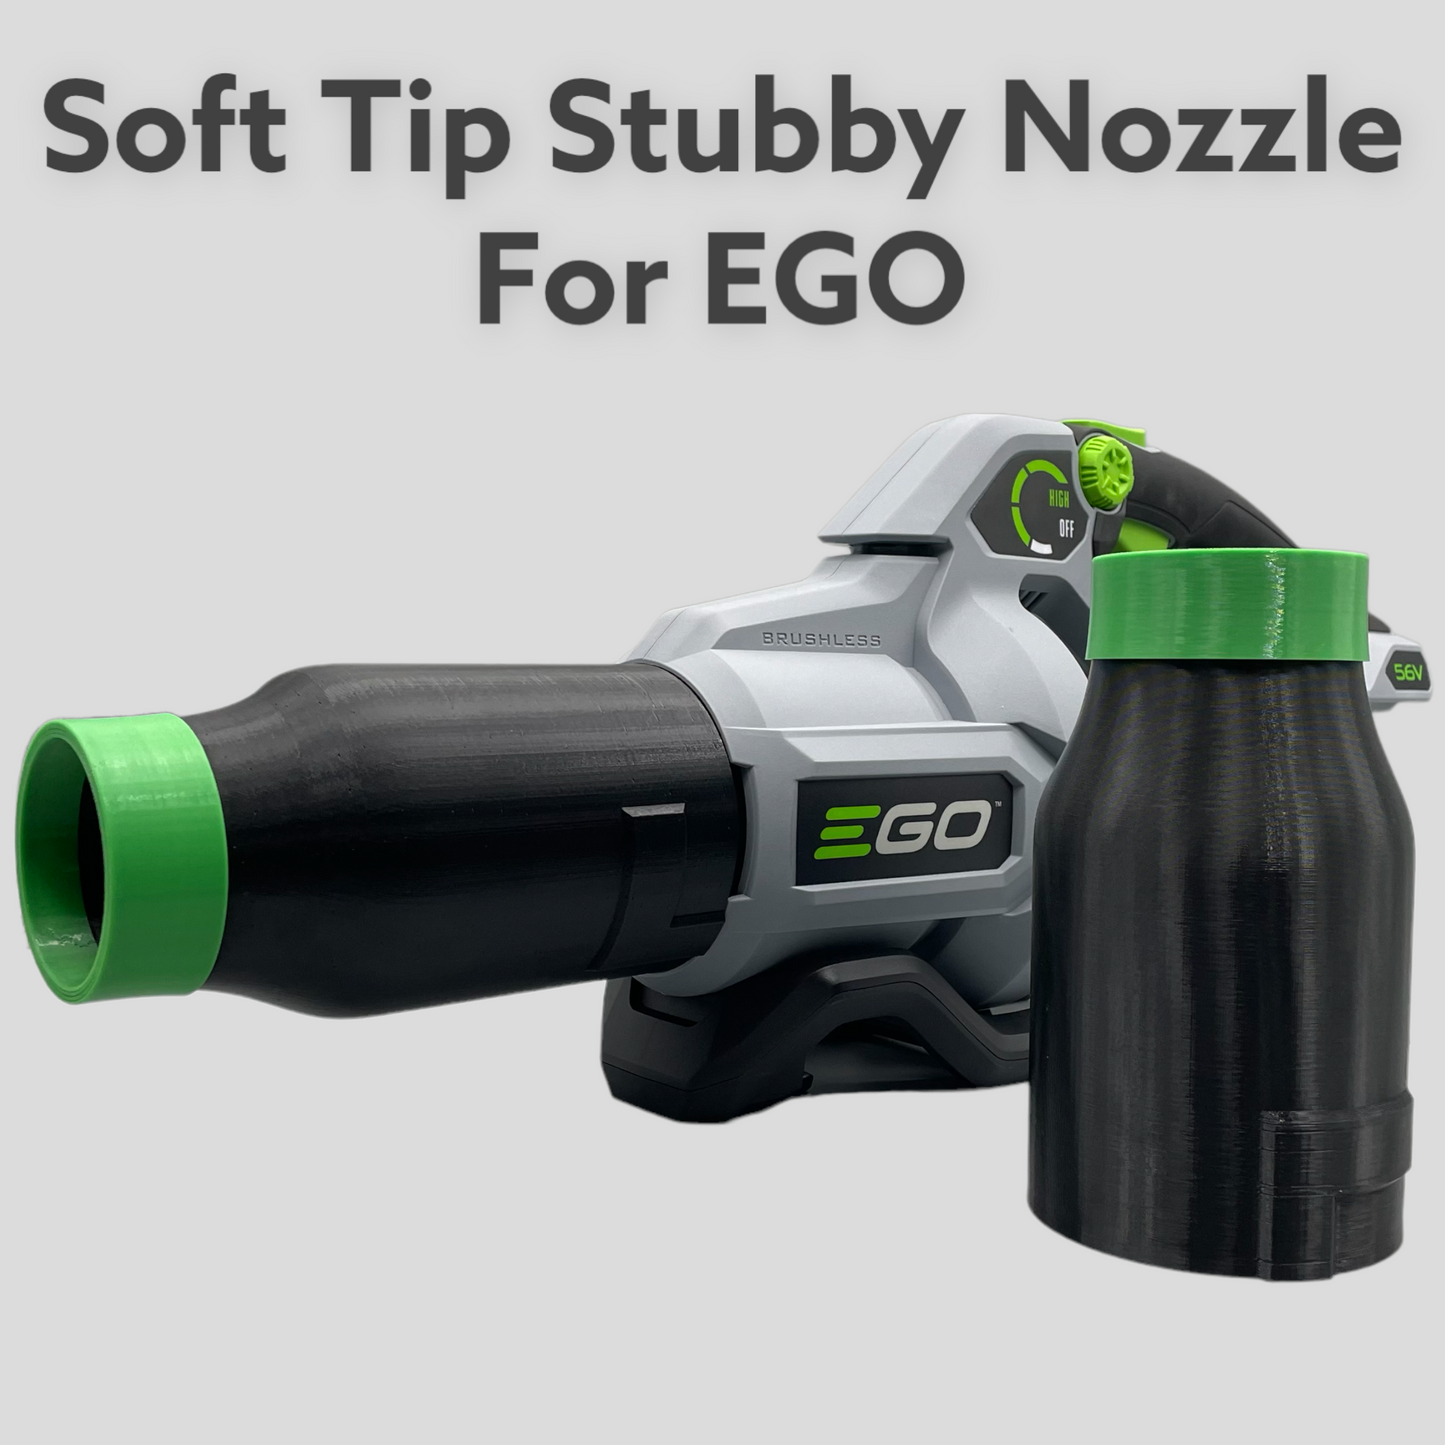 Soft Tip Stubby Car Drying Nozzle for EGO Leaf Blowers NEW and OLD Generation (530, 575, 580, 615, 650, & 765)